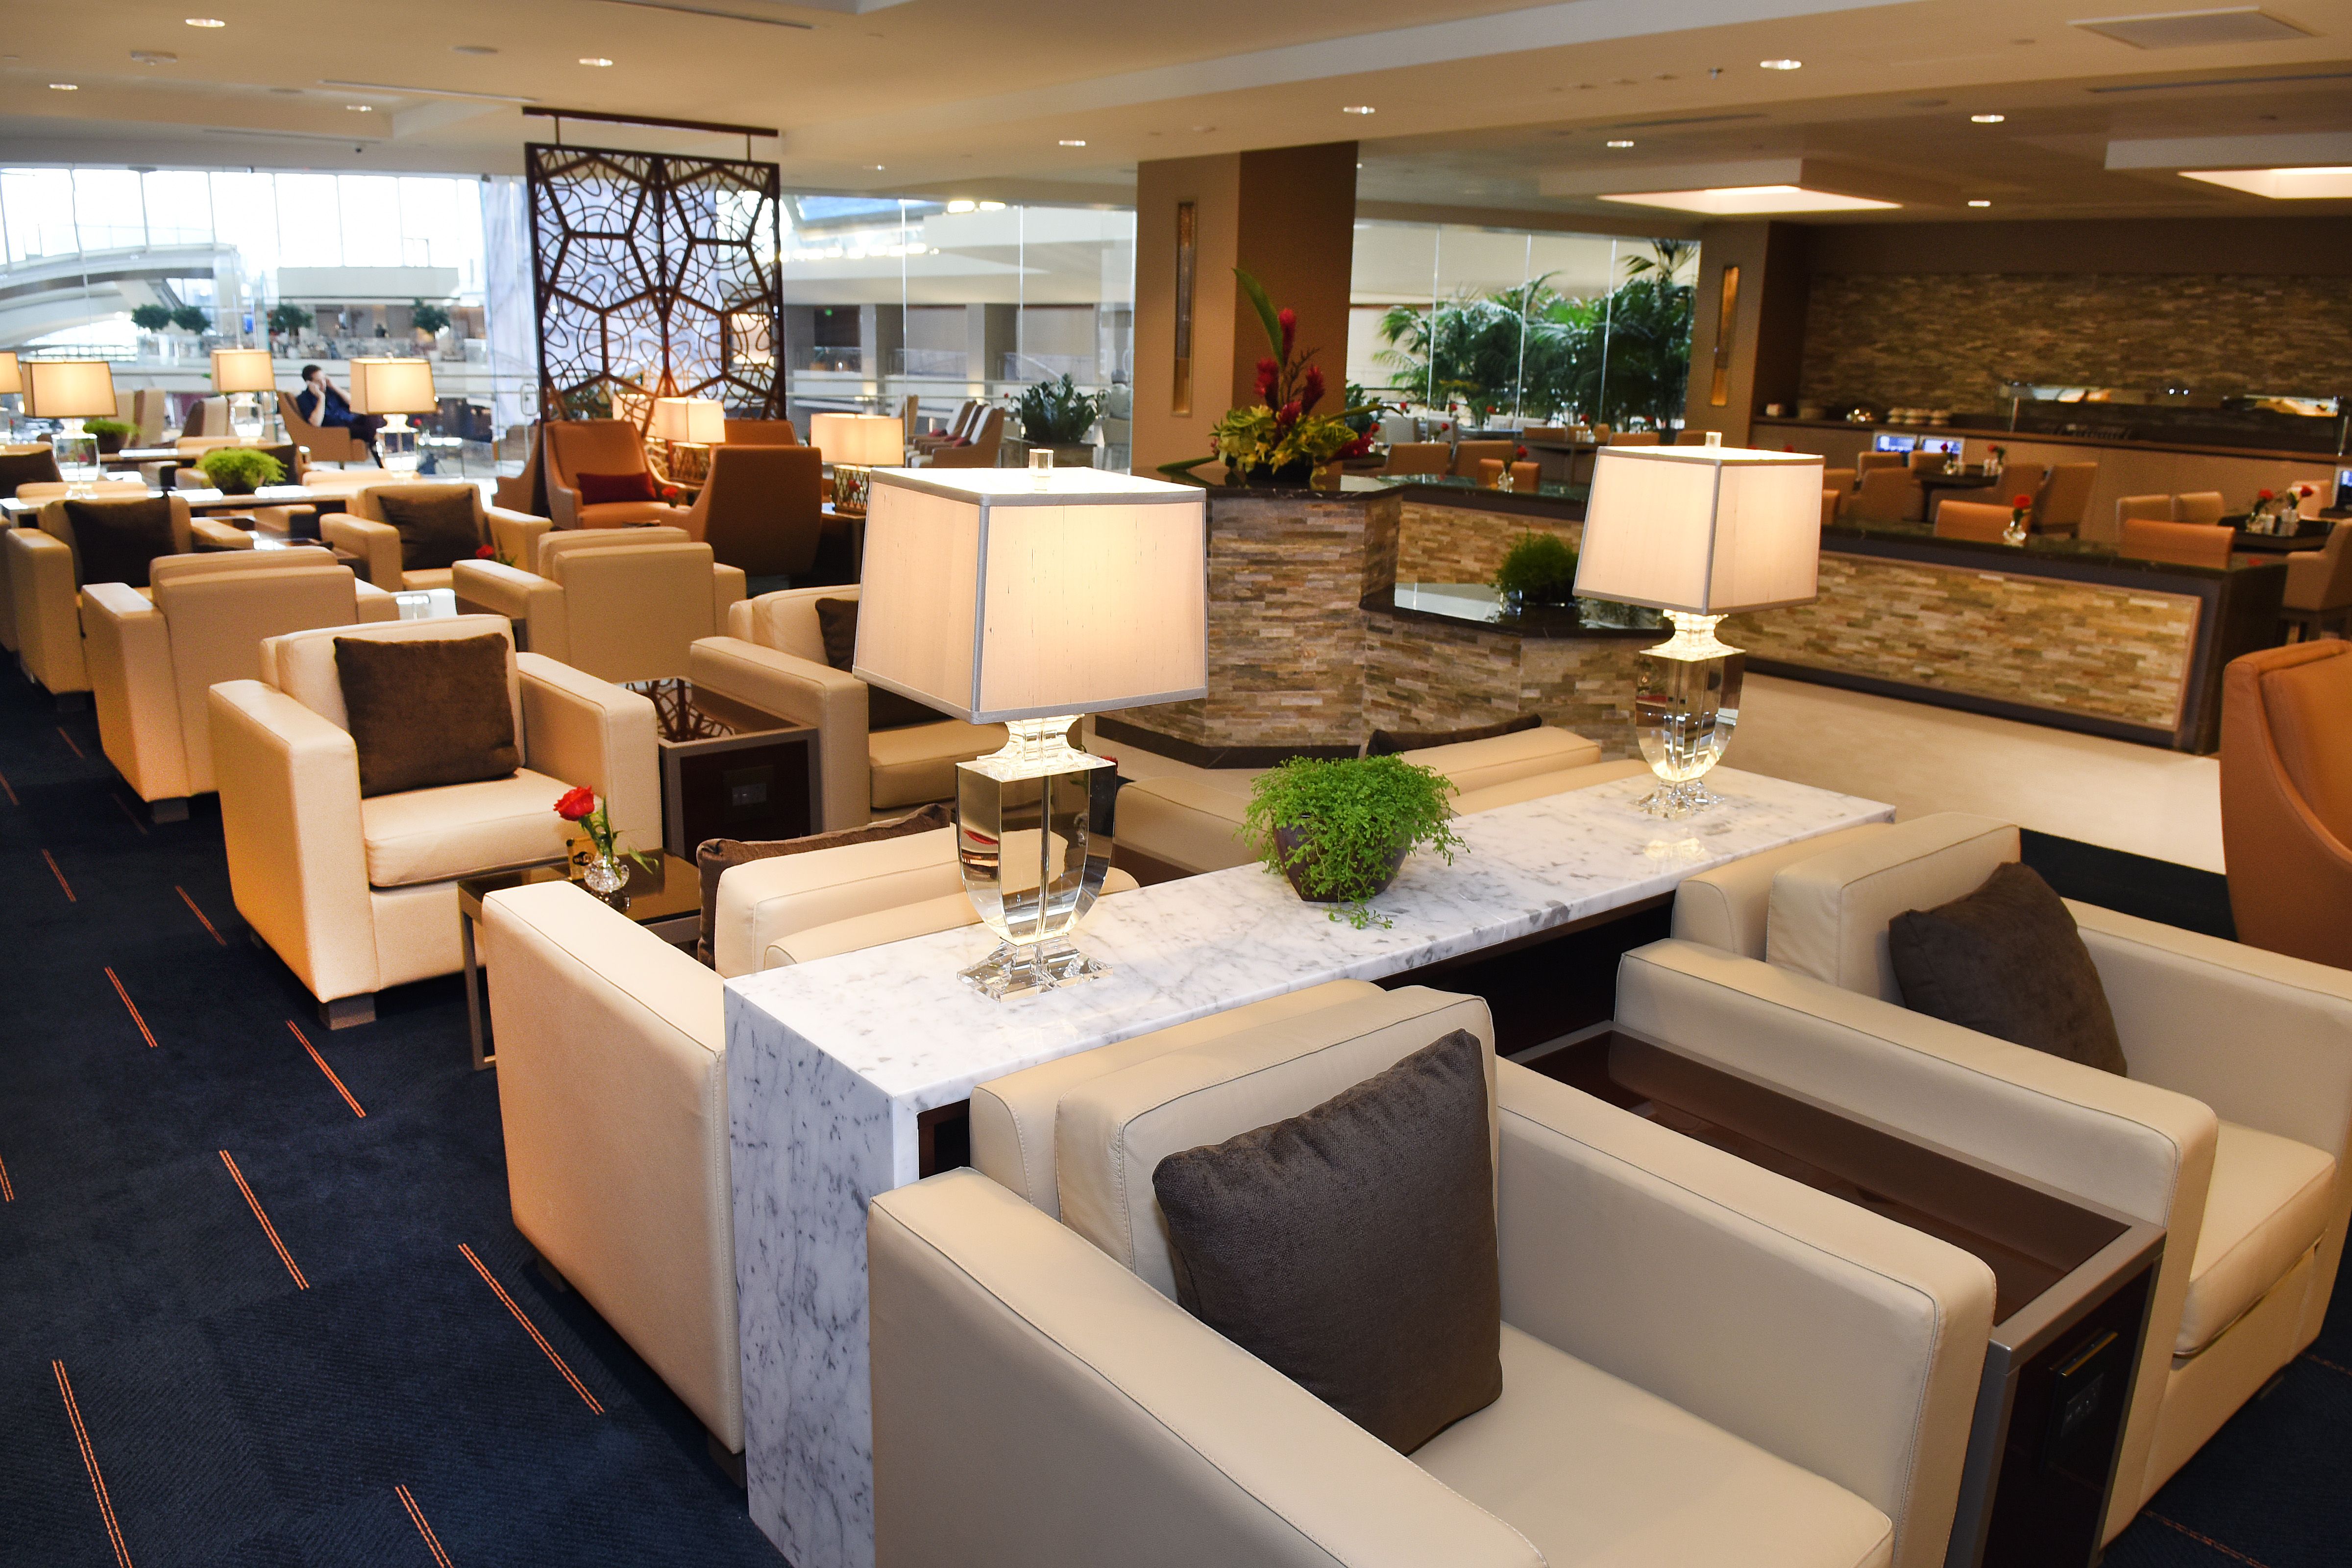 Inside the Emirates lounge at LAX.